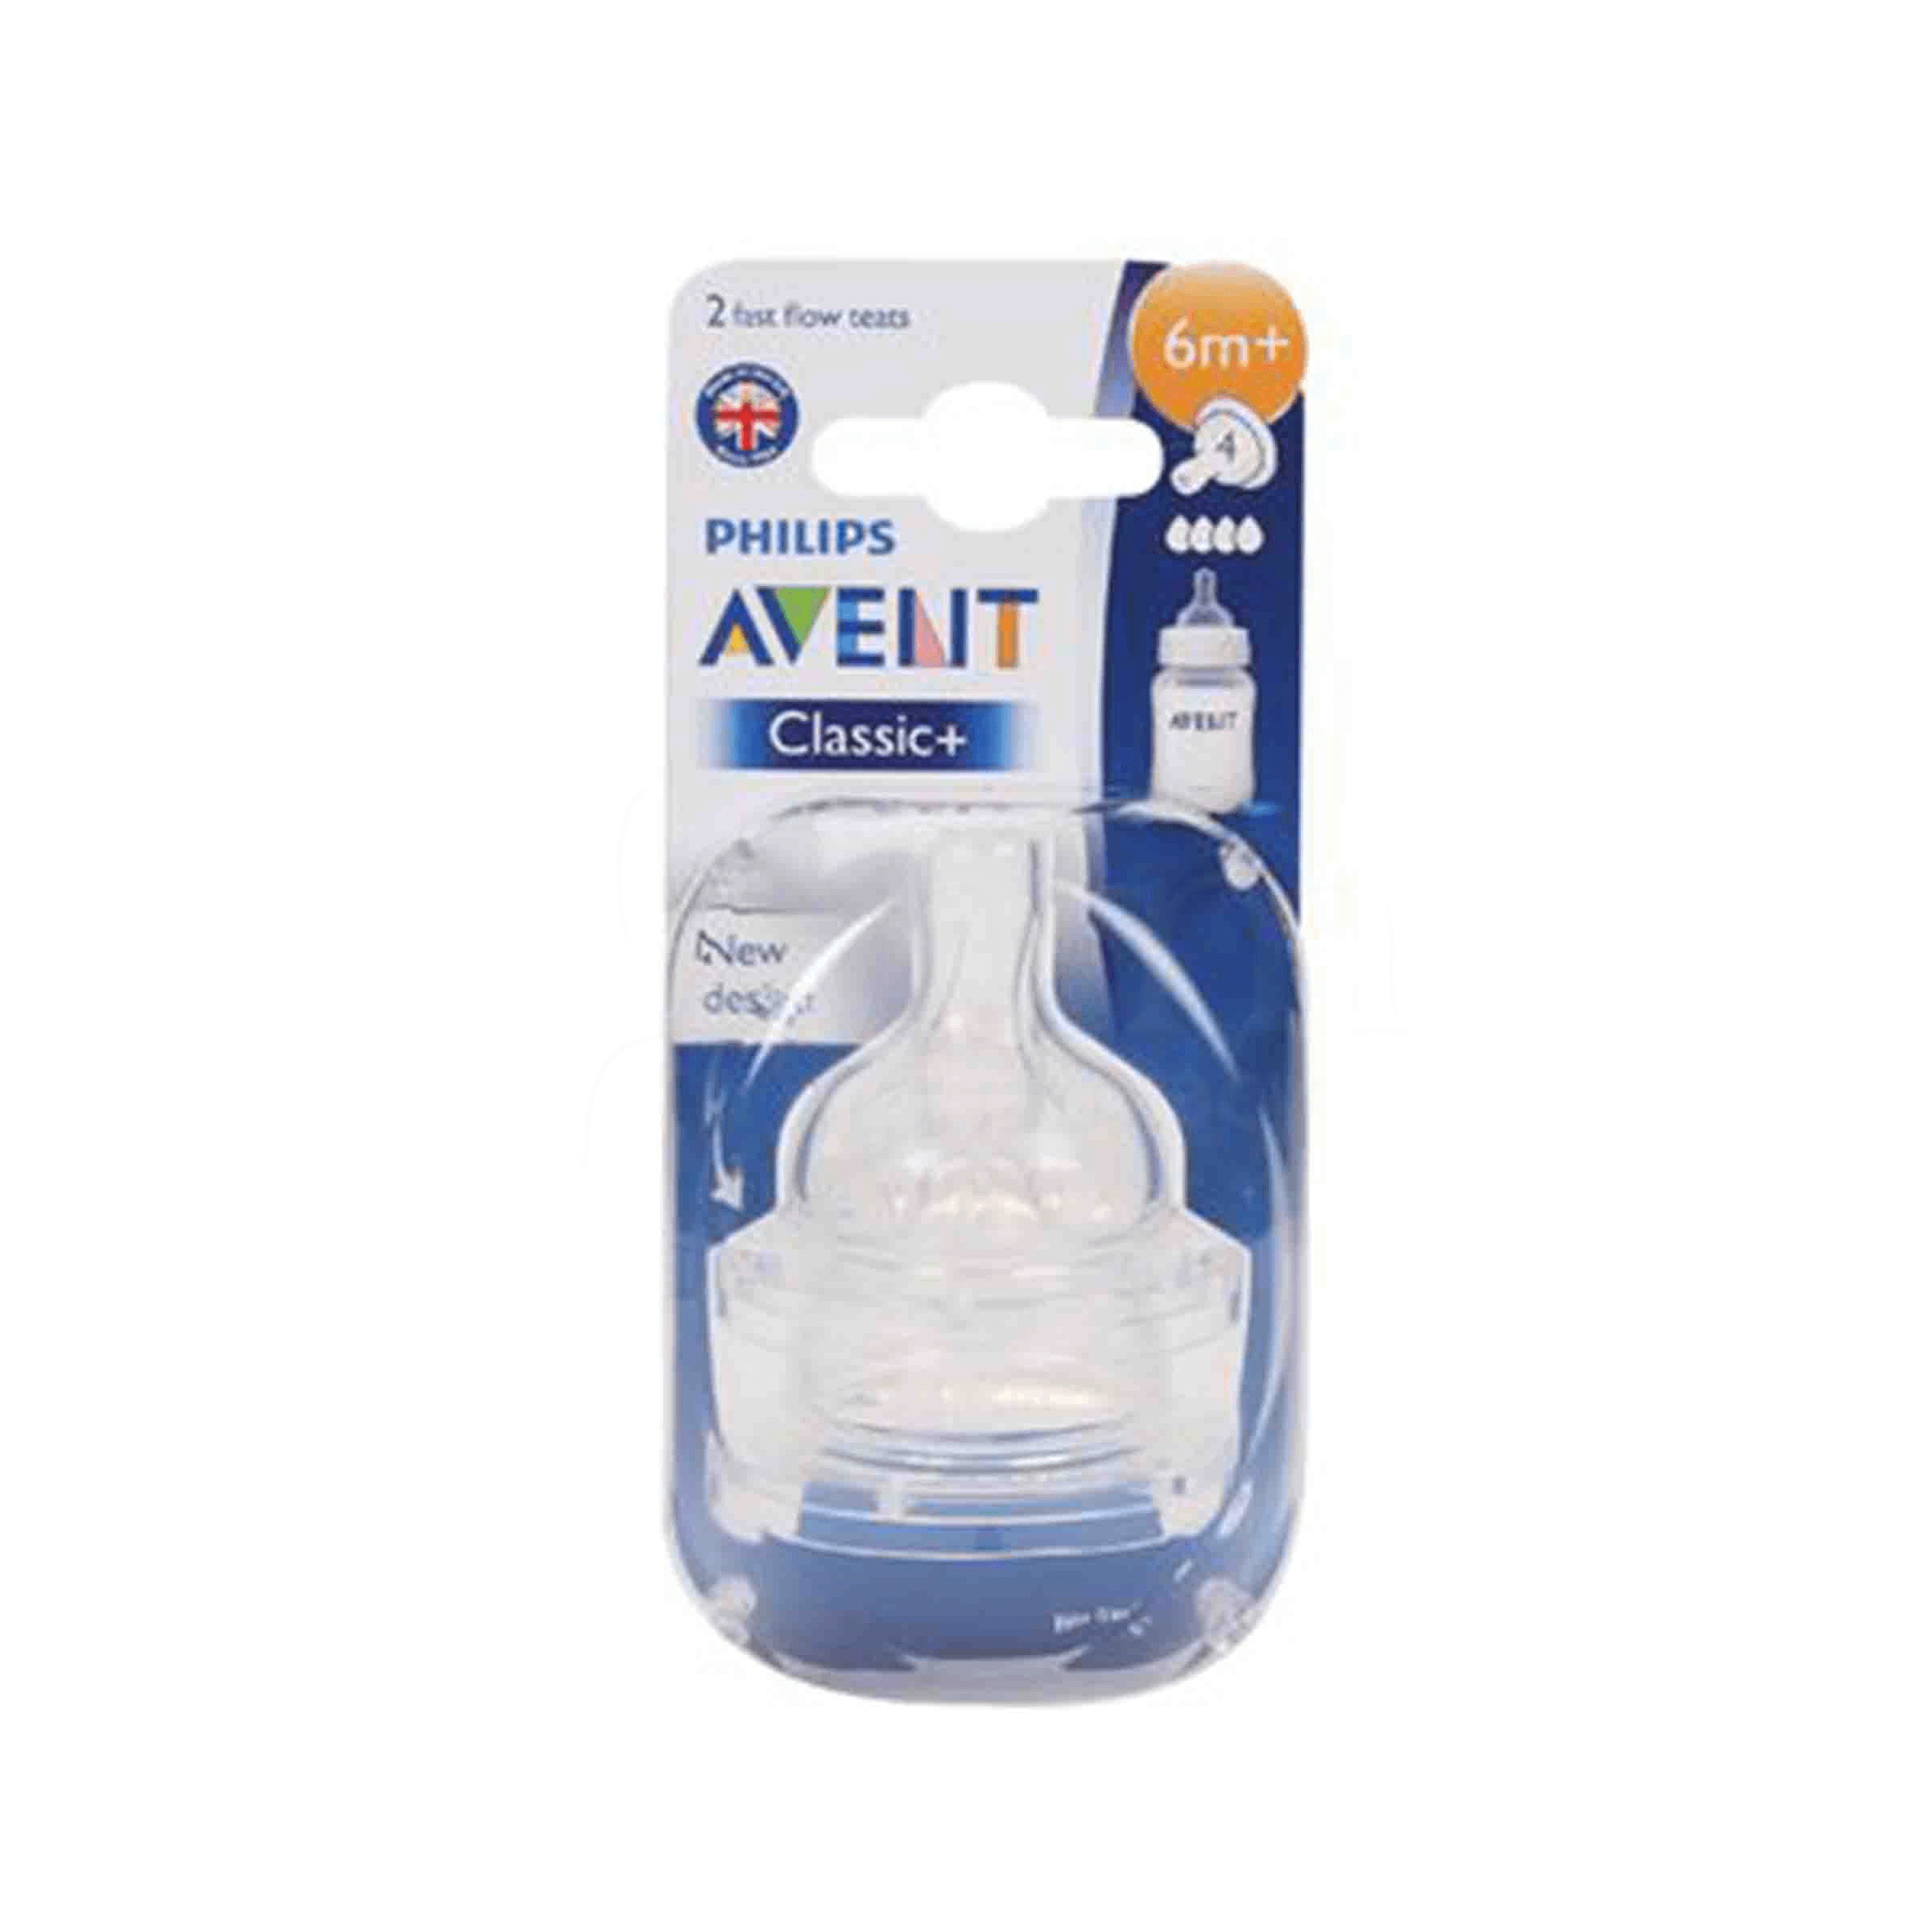 Avent Silicone Teats 6M+4H (20550258)